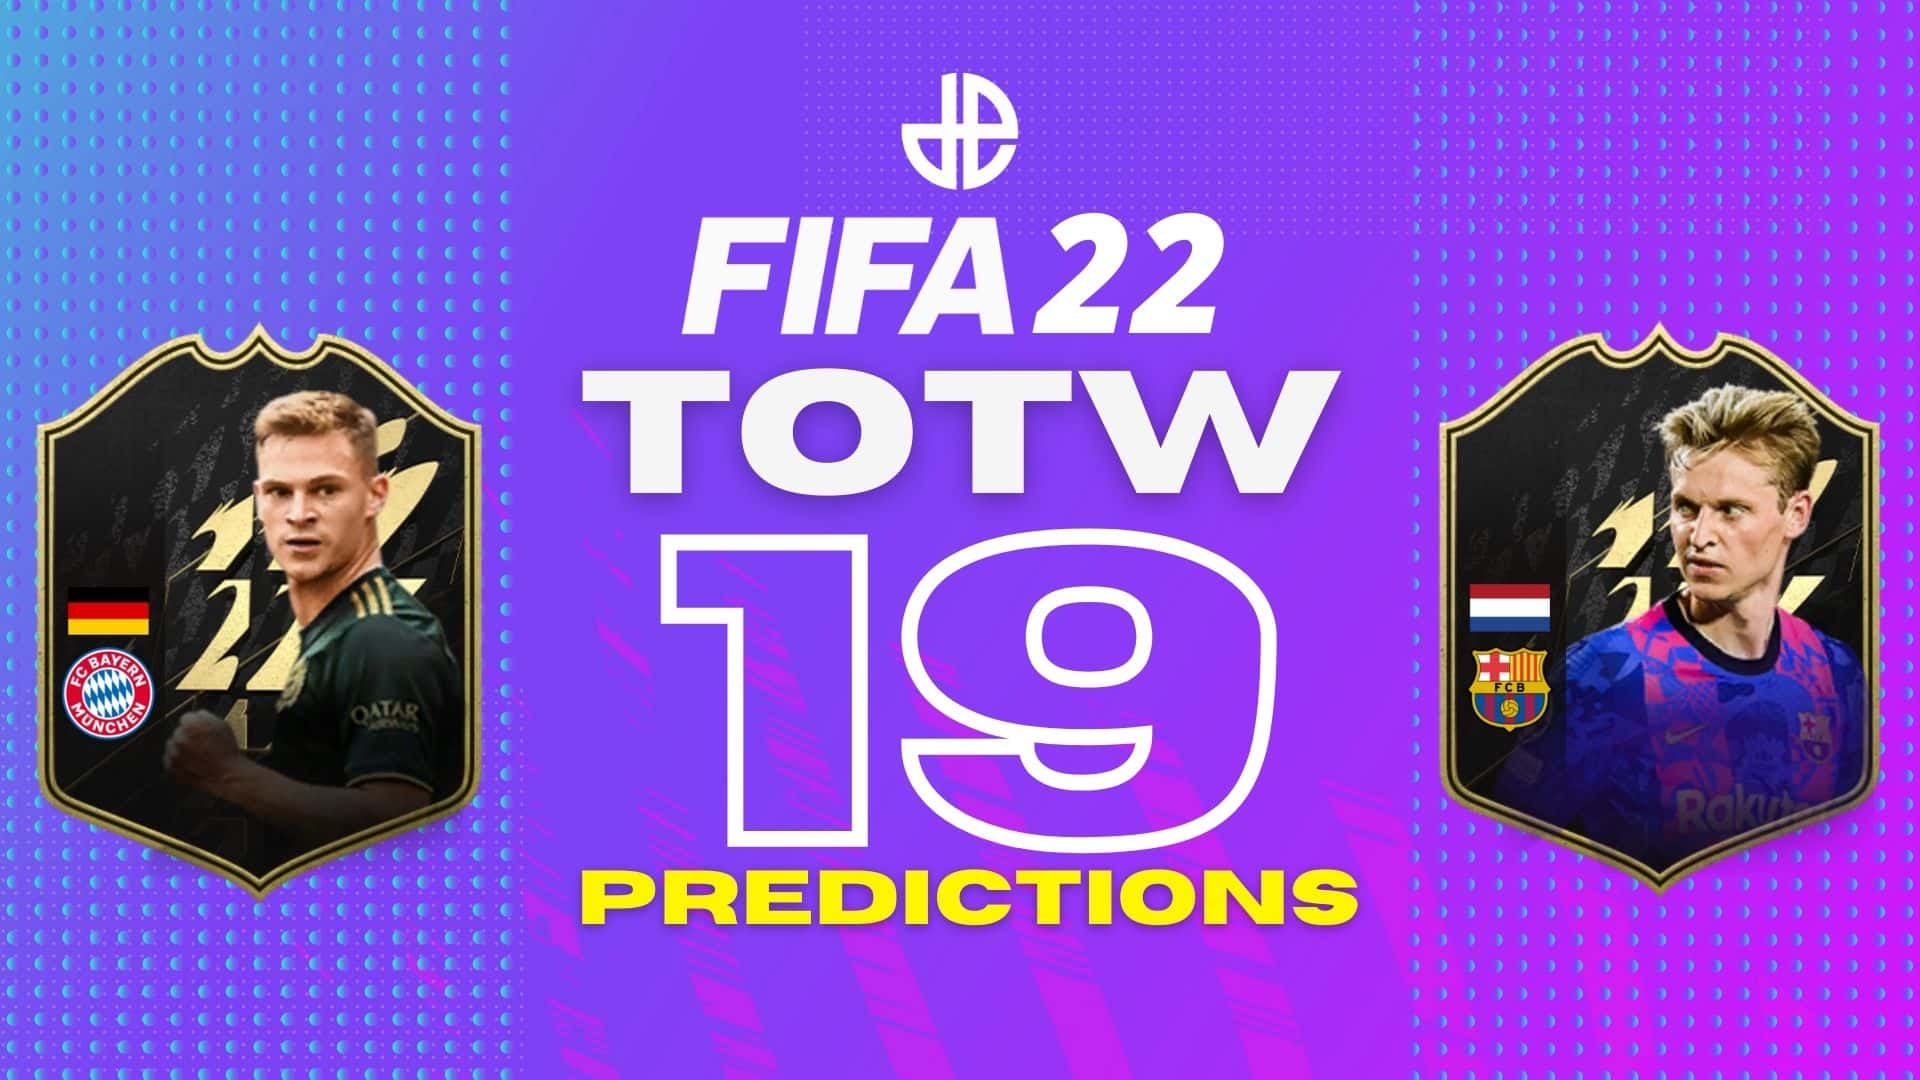 FIFA 22 TOTW 19 predictions graphic with Kimmich and De Jong cards